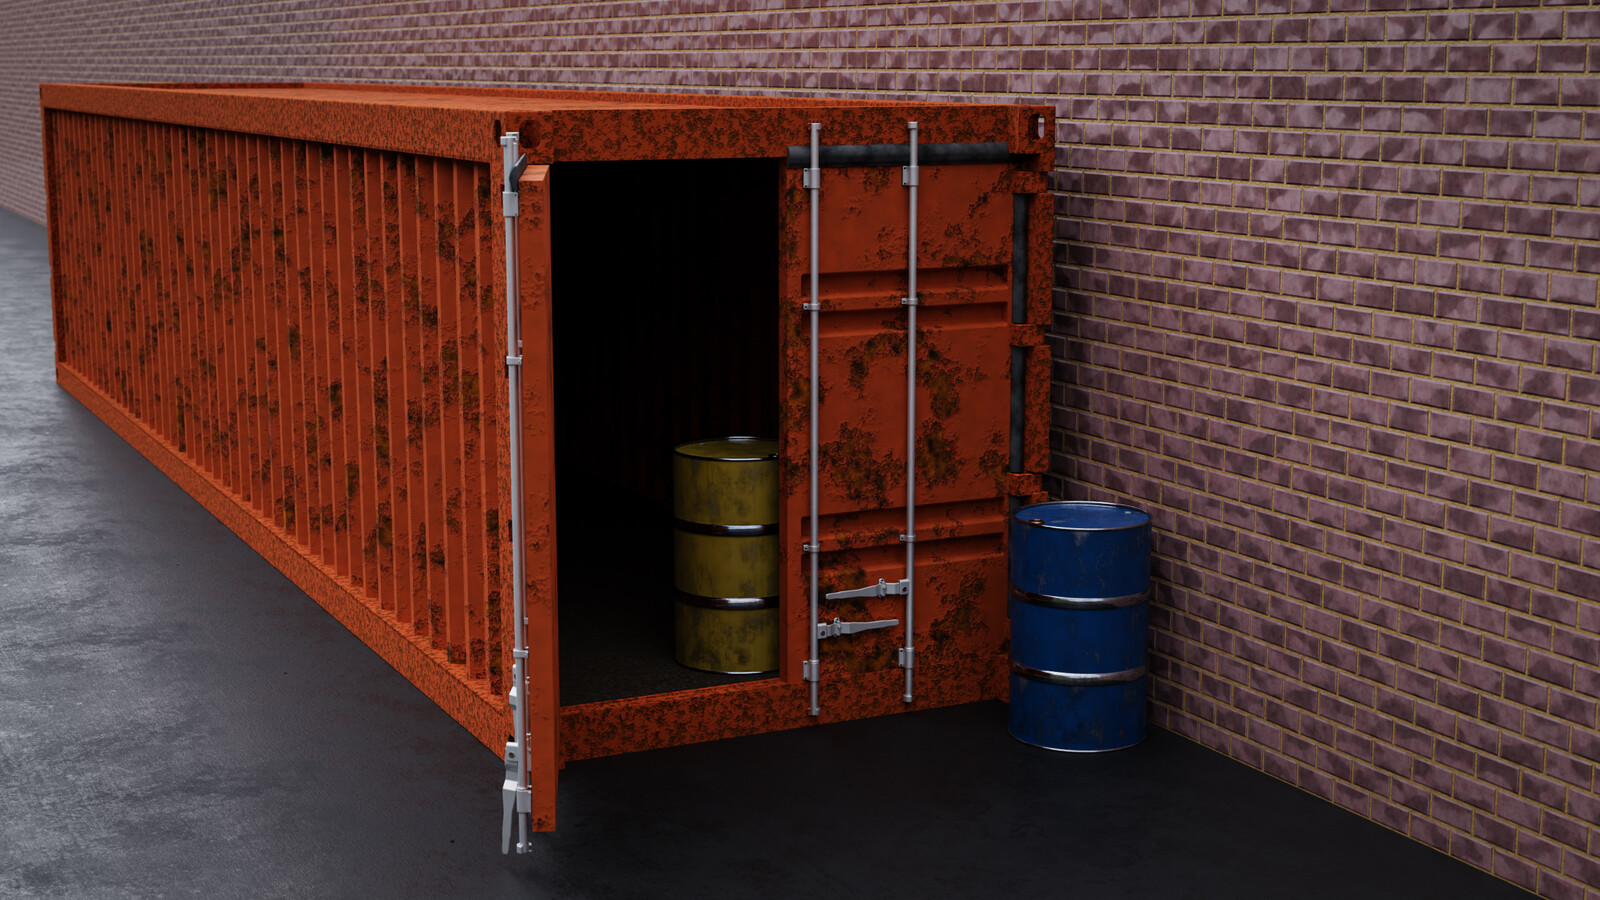 A Container and some Barrels